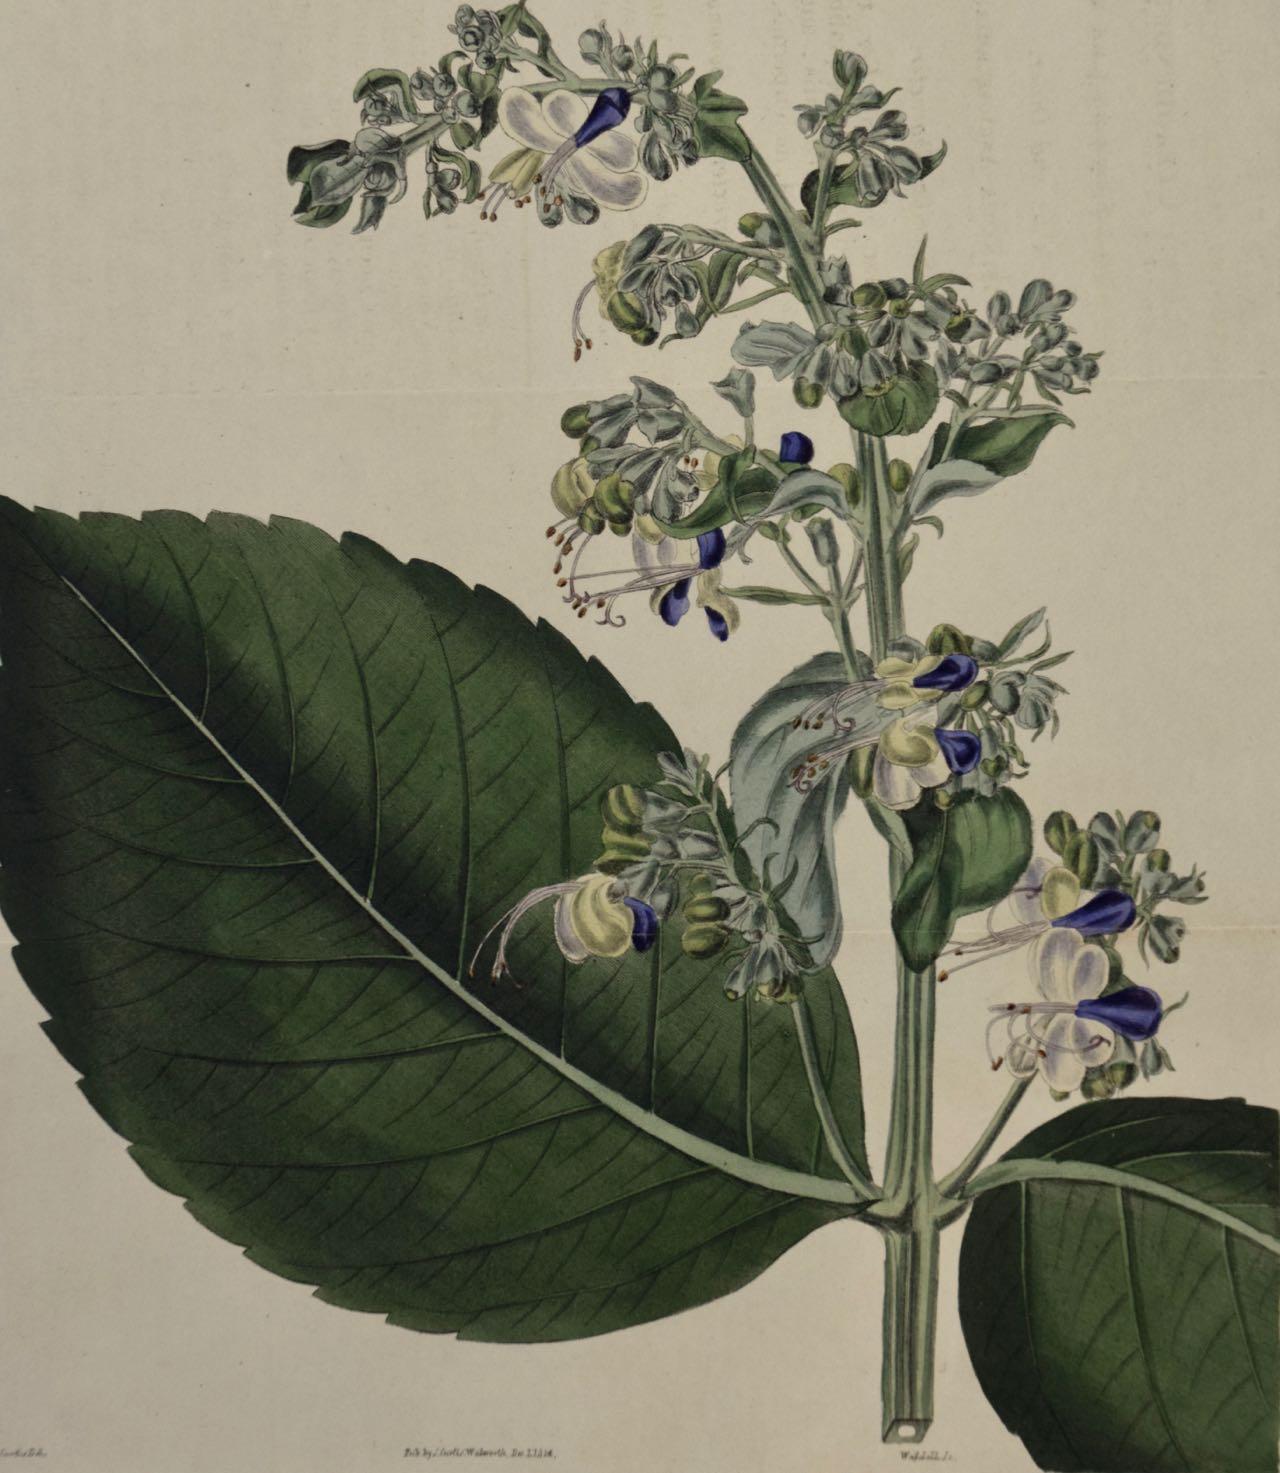 A 19th Century Curtis Hand-colored Engraving of a Flowering Clerodendrum Plant - Print by William Curtis